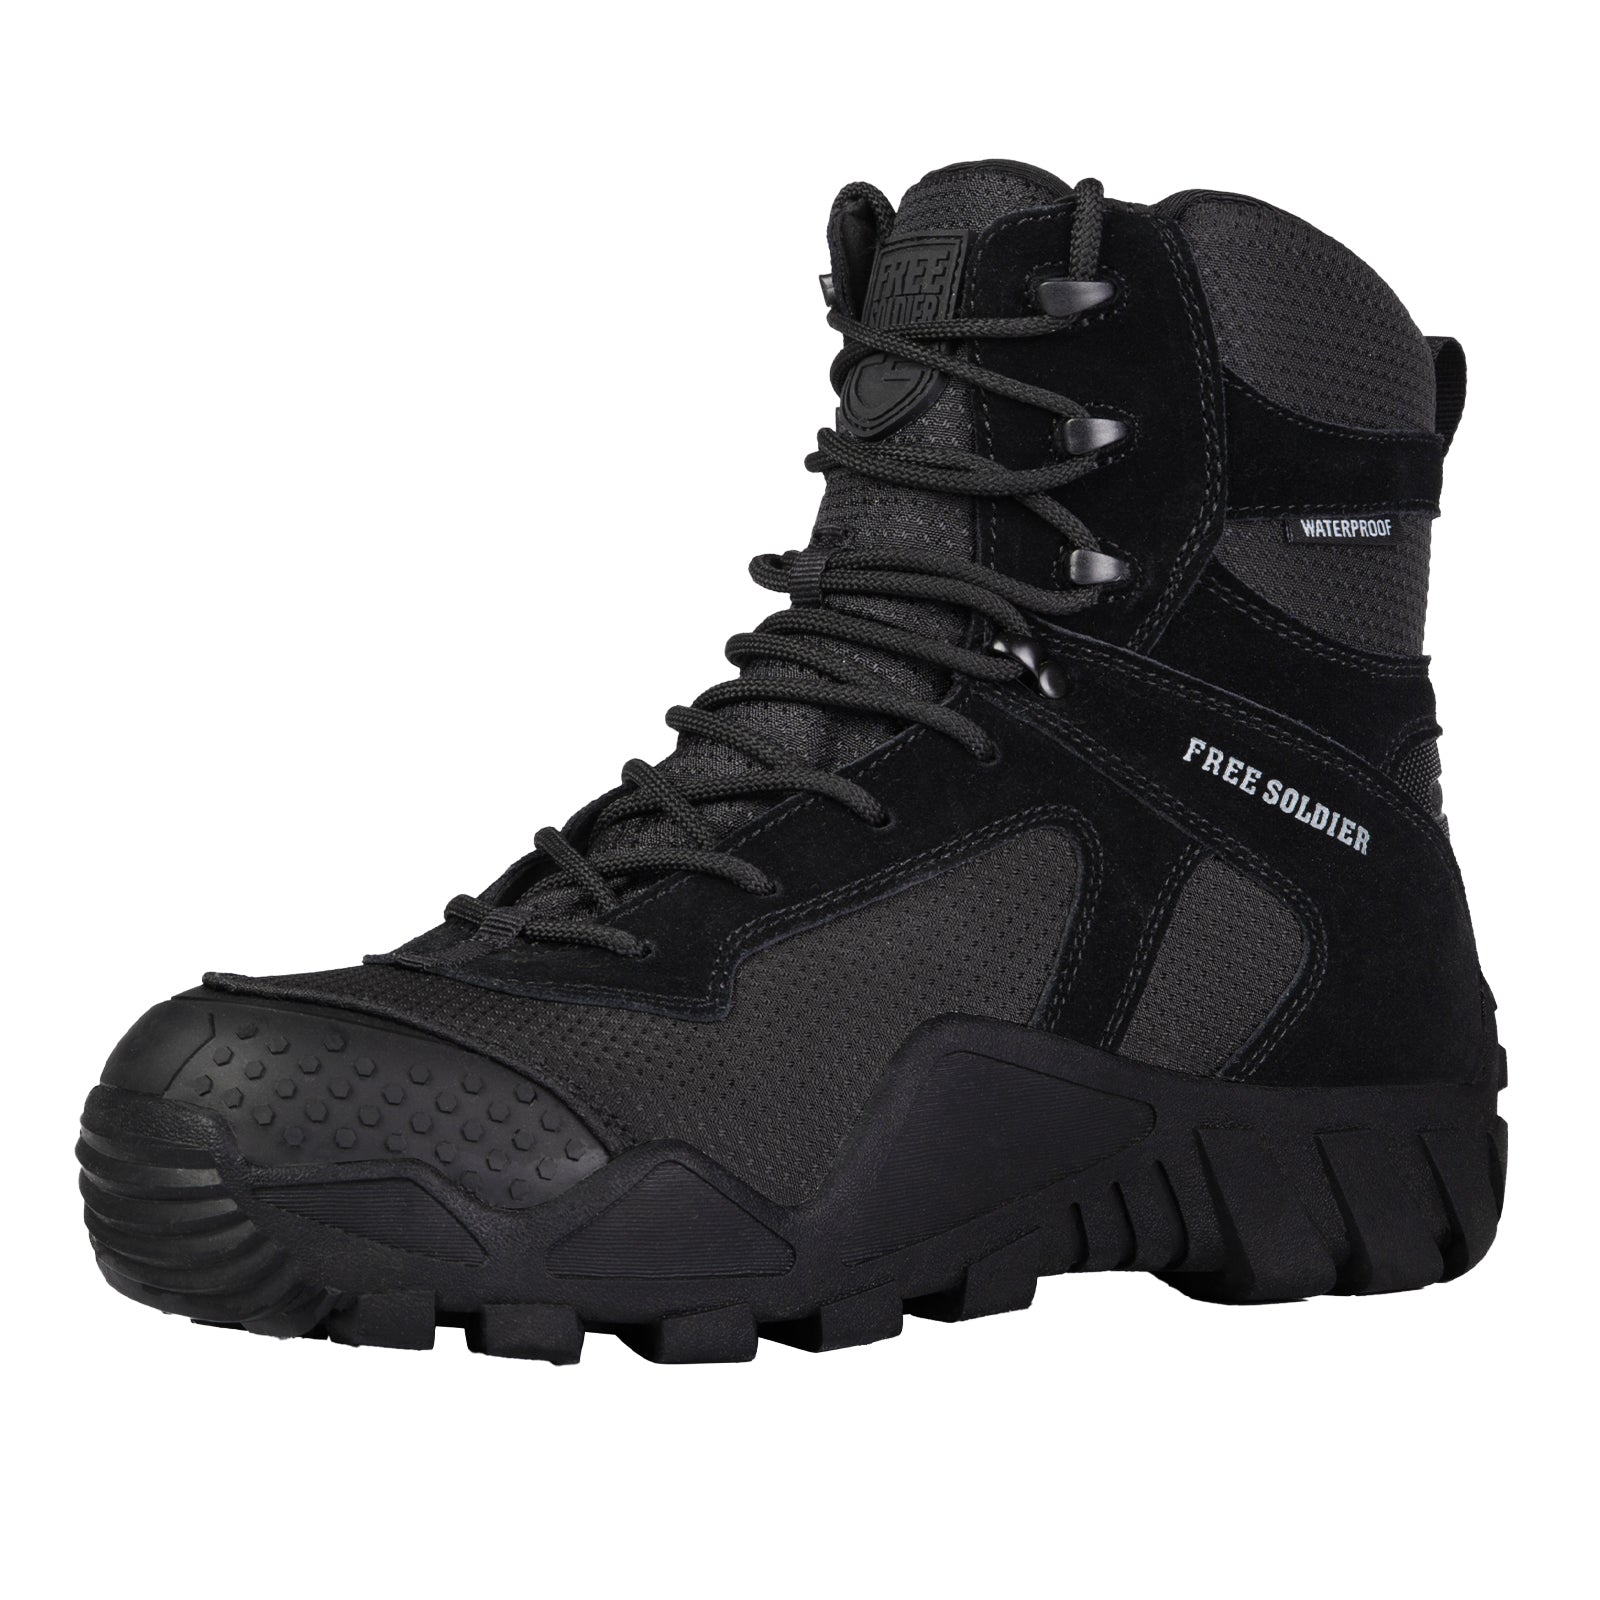 Waterproof Military Boots for Outdoor